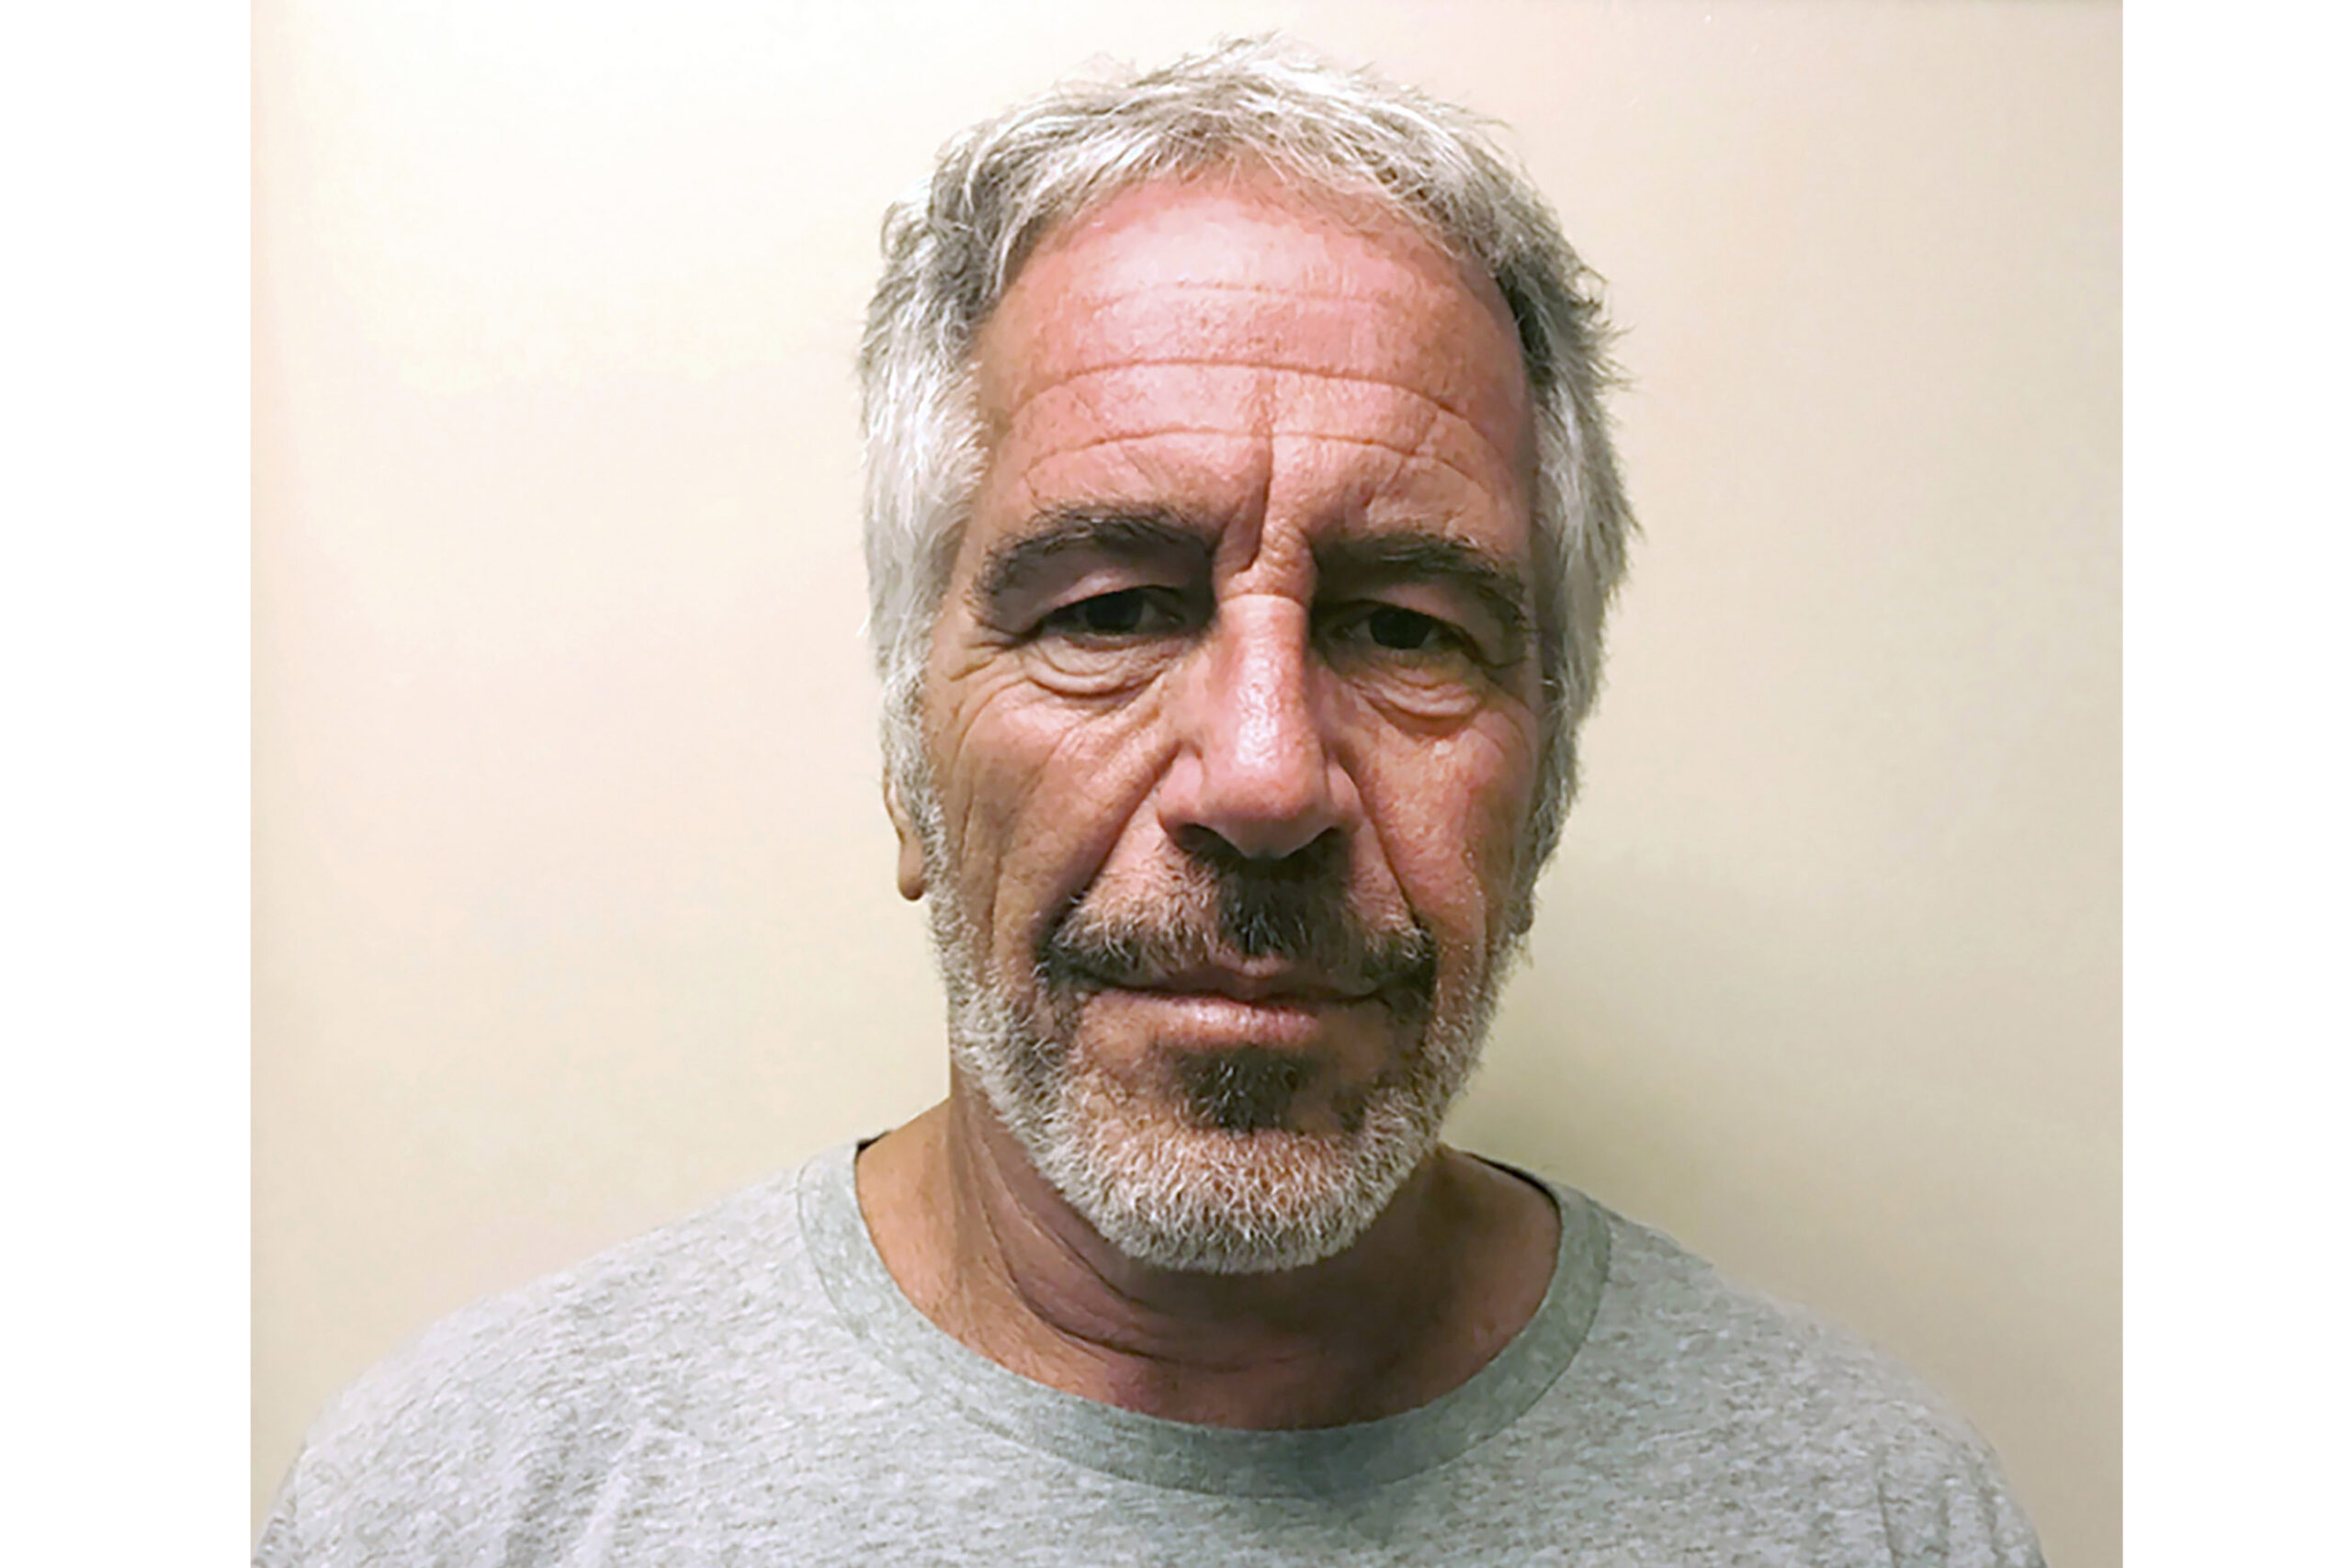 This photo provided by the New York State Sex Offender Registry shows Jeffrey Epstein, March 28, 2017.Photo courtesy of New York State Sex Offender Registry via AP